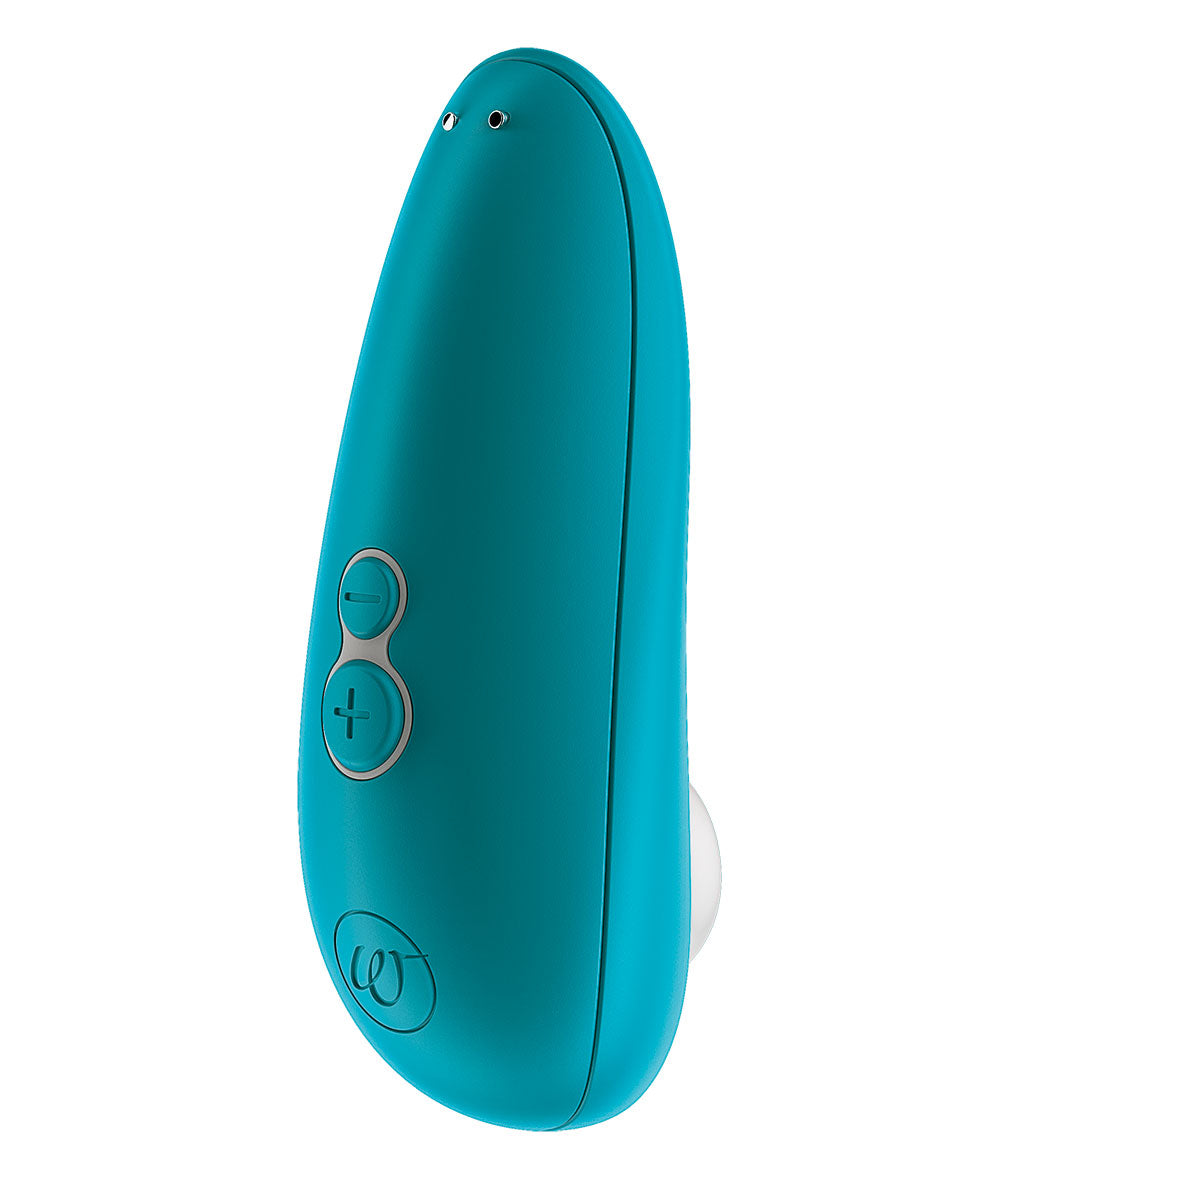 Womanizer Starlet 3 Rechargeable Silicone Compact Pleasure Air Clitoral Stimulator Turquoise - Zateo Joy